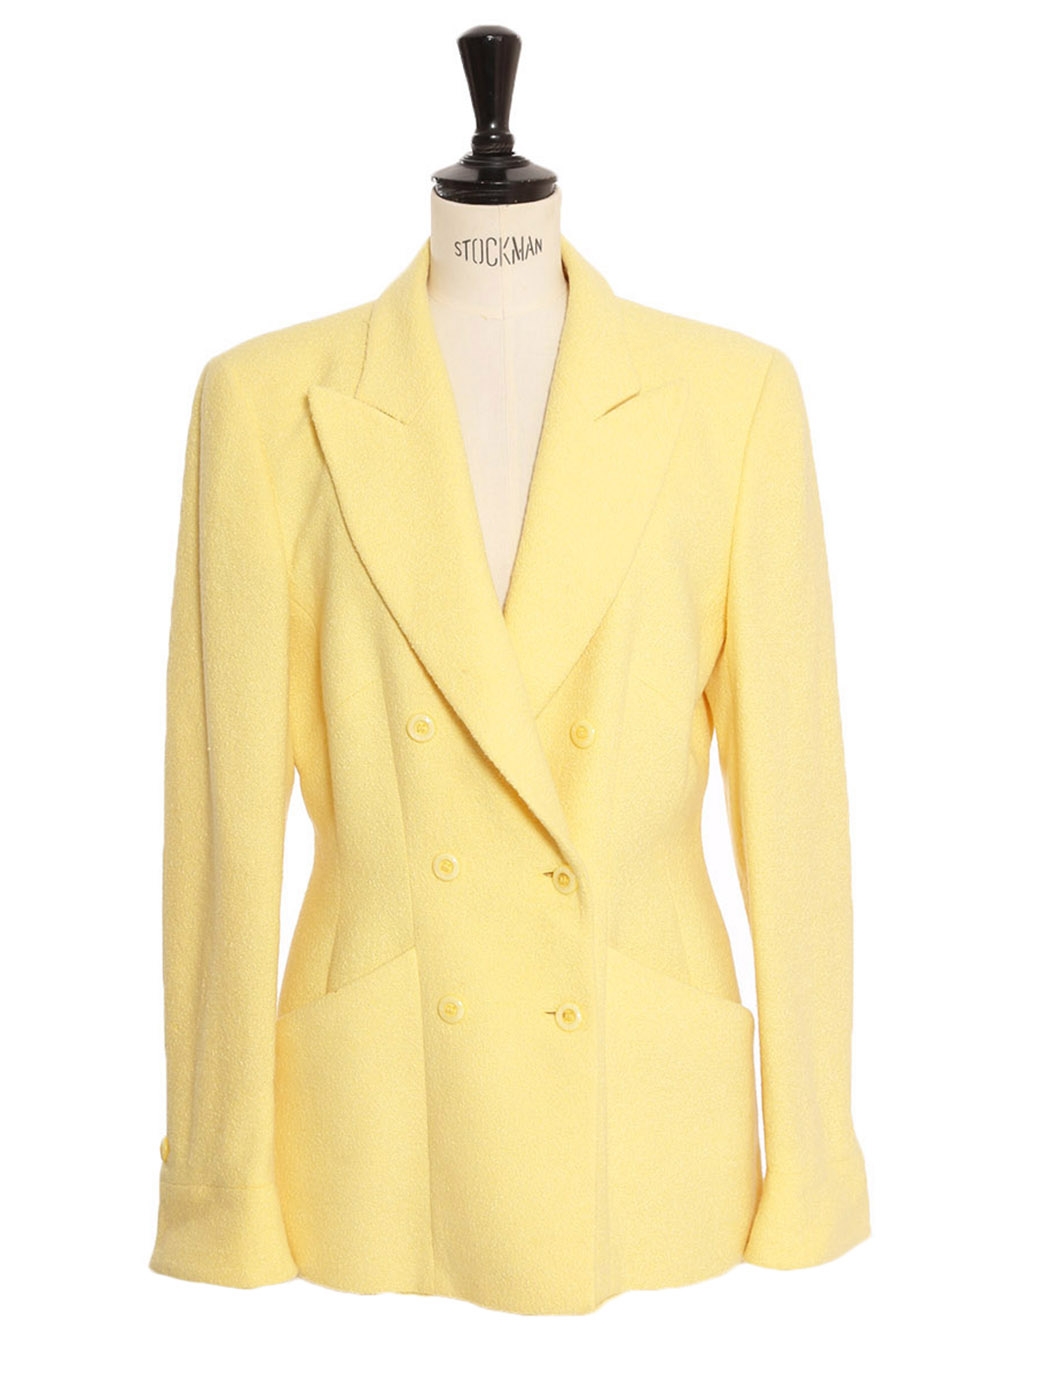 Boutique ESCADA Sunshine yellow wool tweed suit double breasted jacket and  skirt Size 36